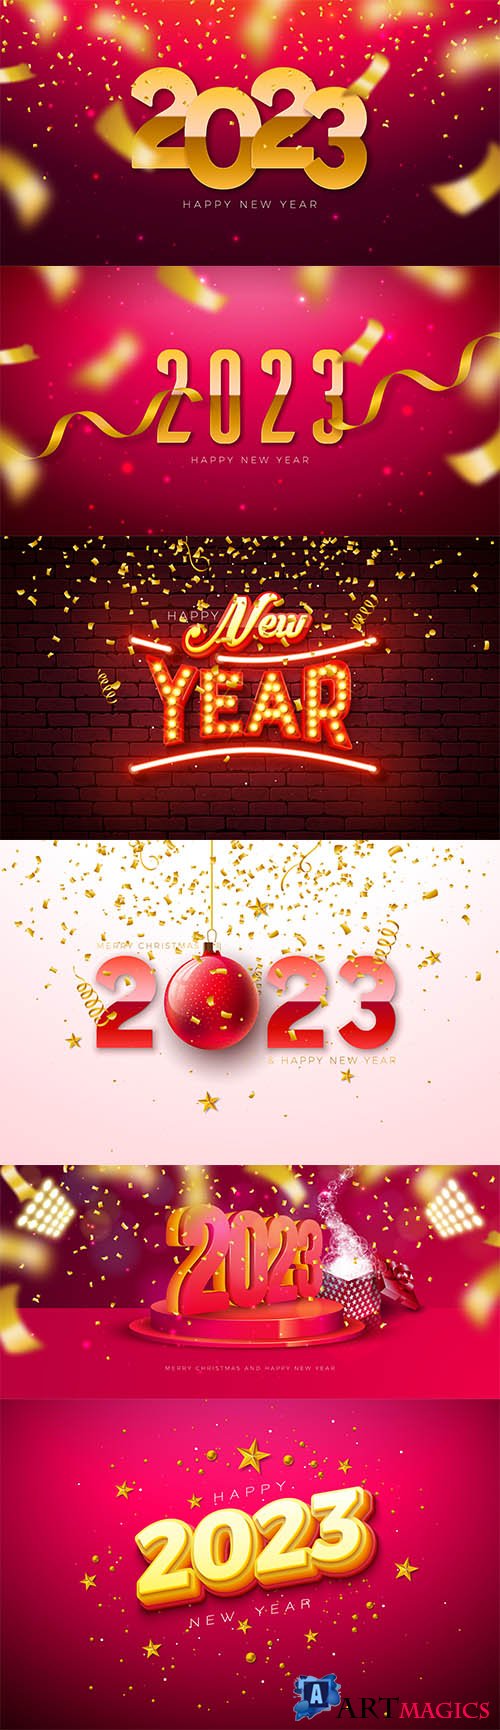 Happy new year 2023 illustration with glowing light bulb number and gold star